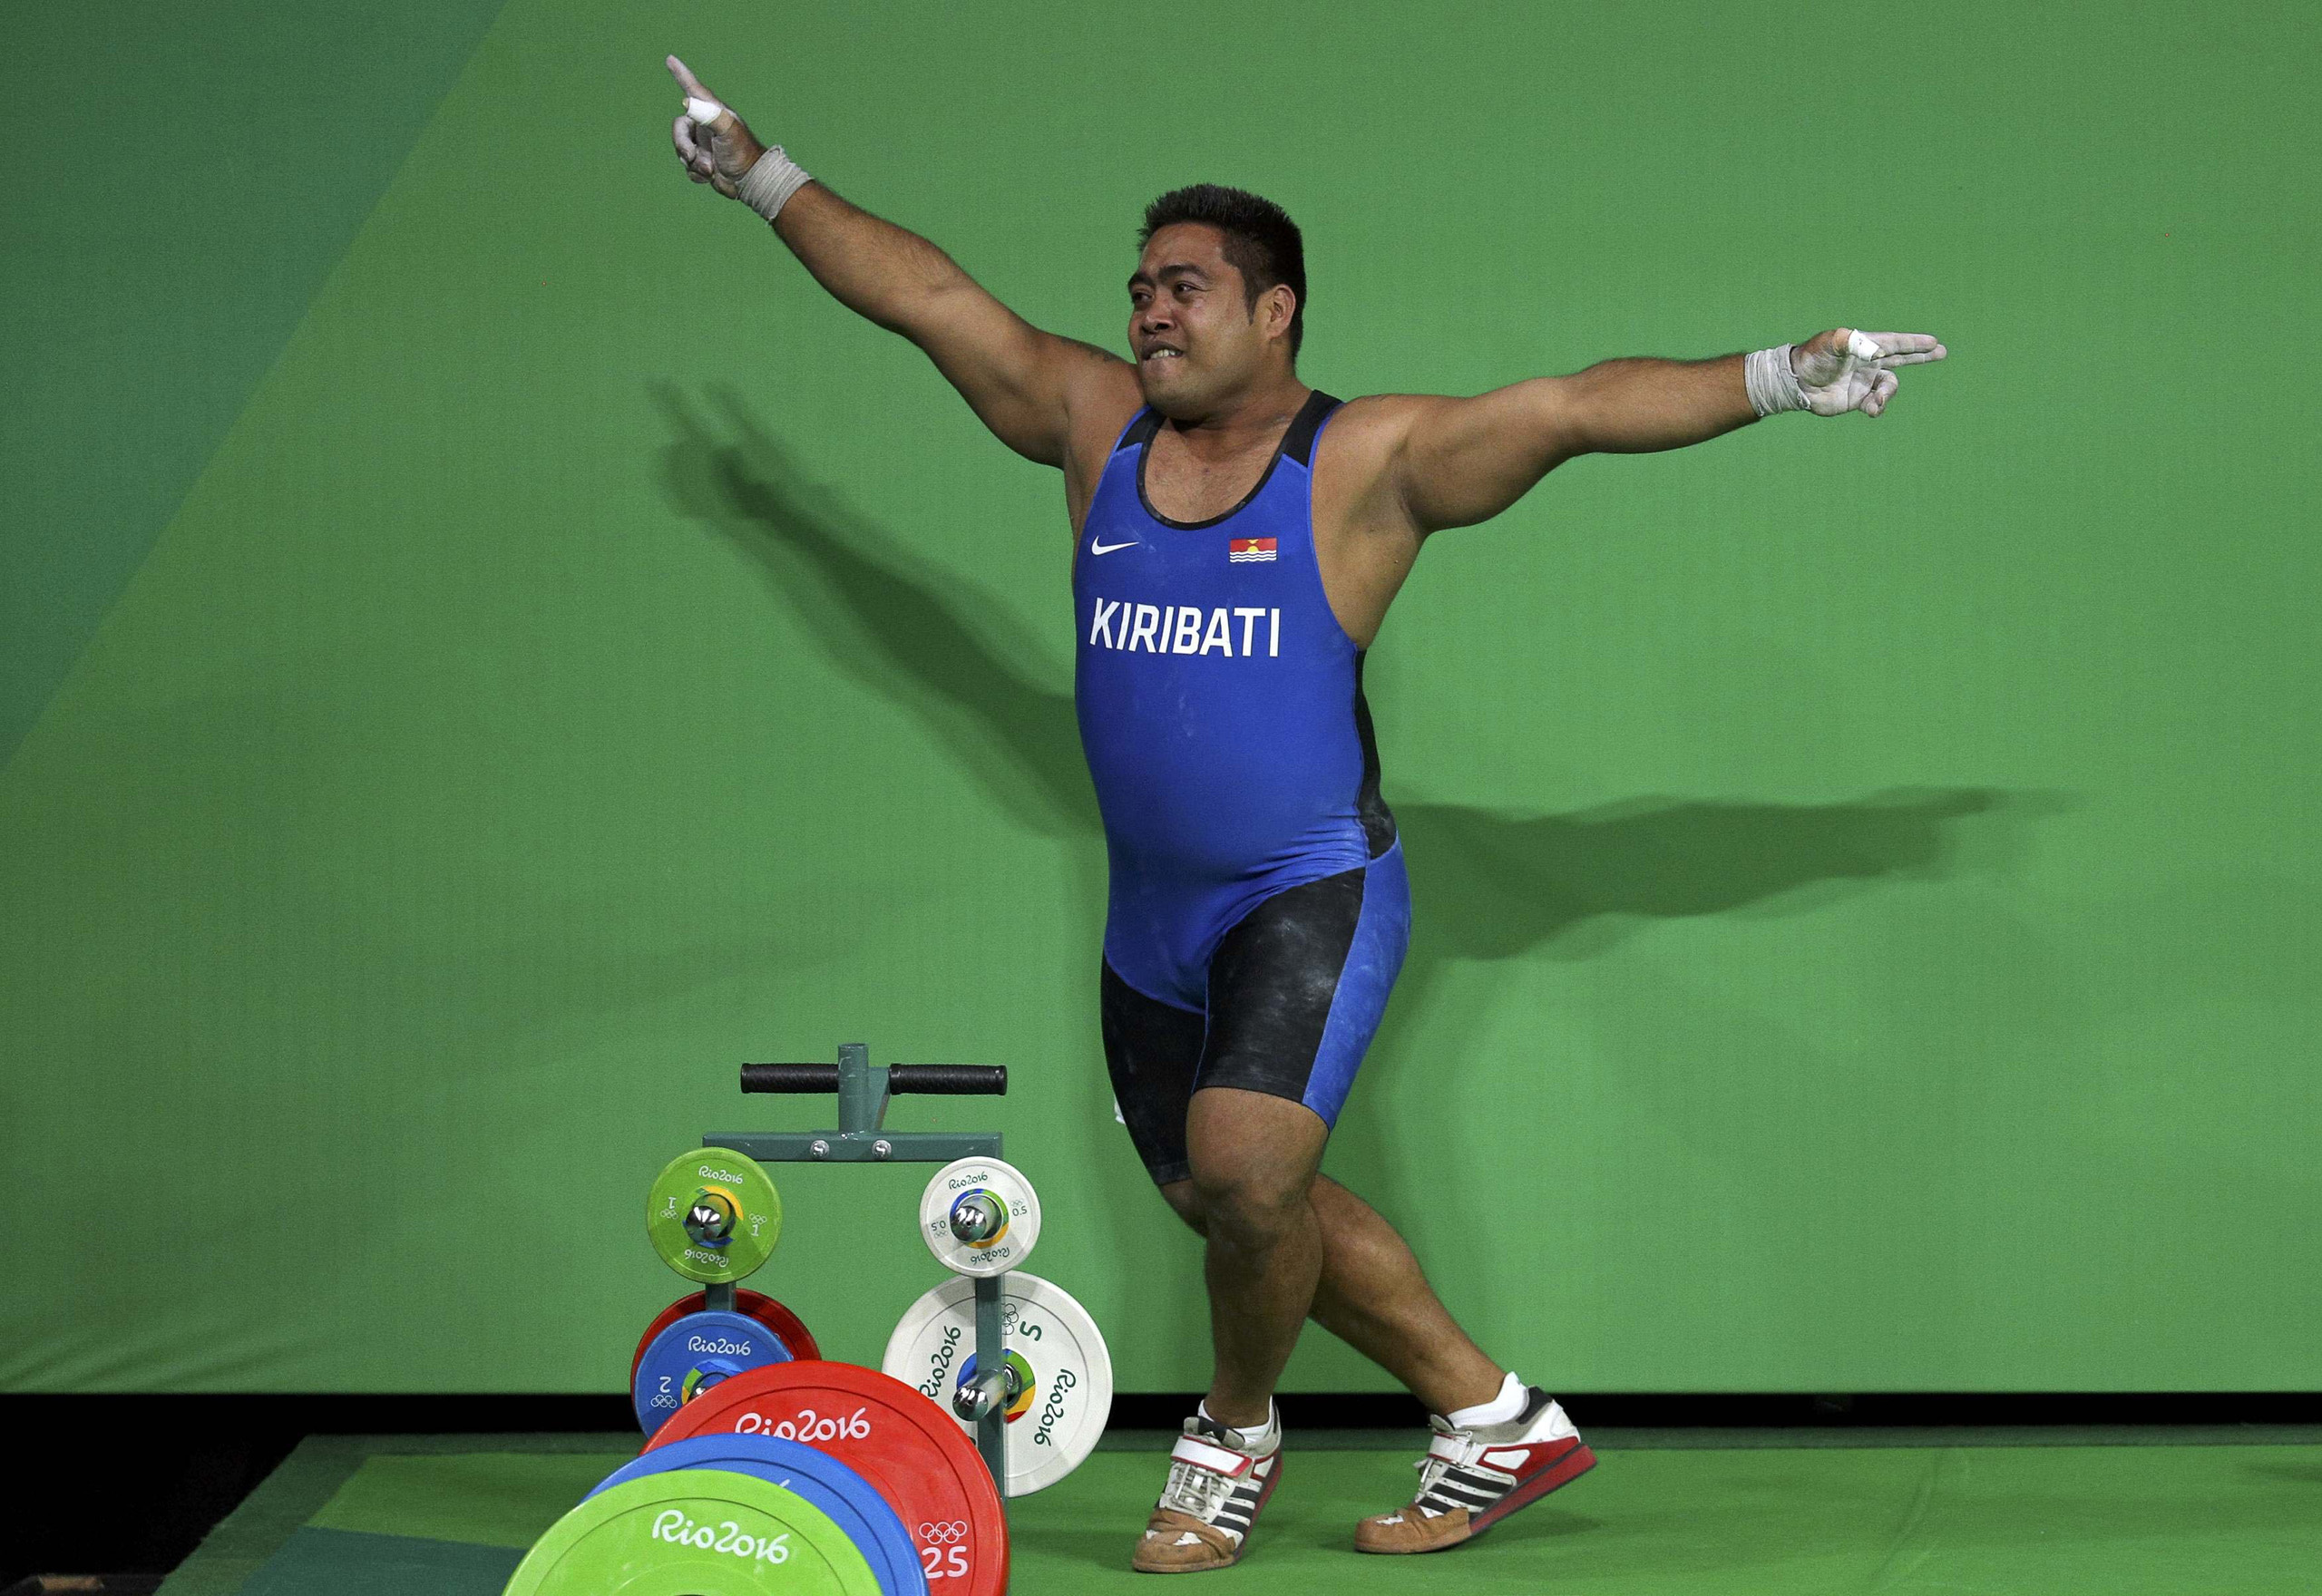 David Katoatau of Kiribati dances during the Men's 105kg Group B Weightlifting event on Day 10 of the Rio 2016 Olympic Games at Riocentro - Pavilion 2 in Rio de Janeiro on Aug. 15, 2016.